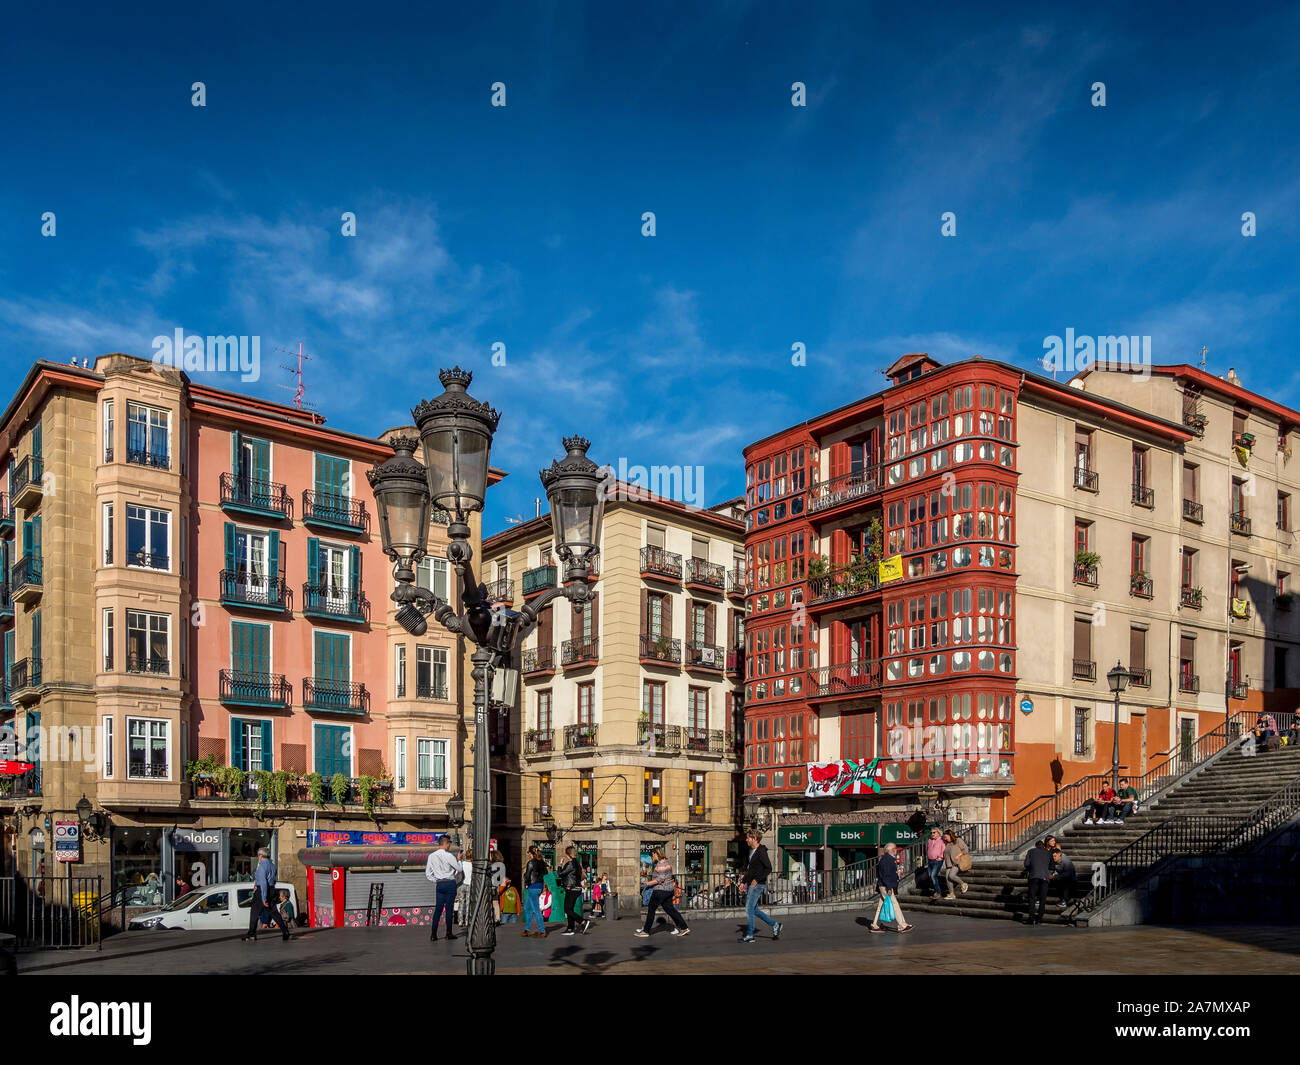 View of Historic Old Town Bilbao, Spain October, 26, 2019 Stock Photo